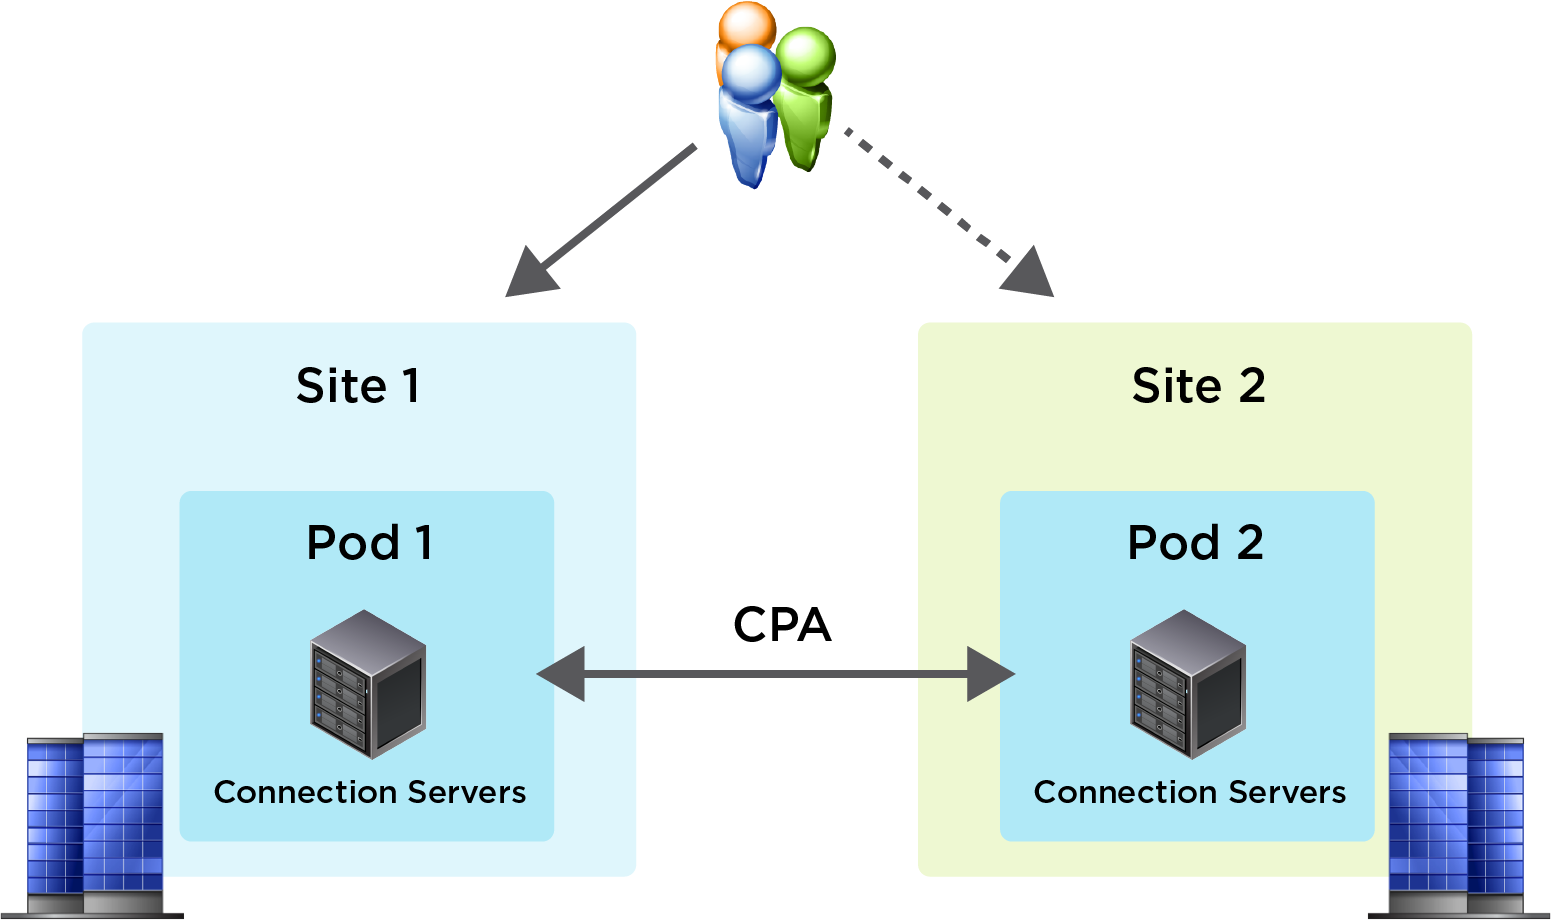 A diagram of a cpa

Description automatically generated with low confidence